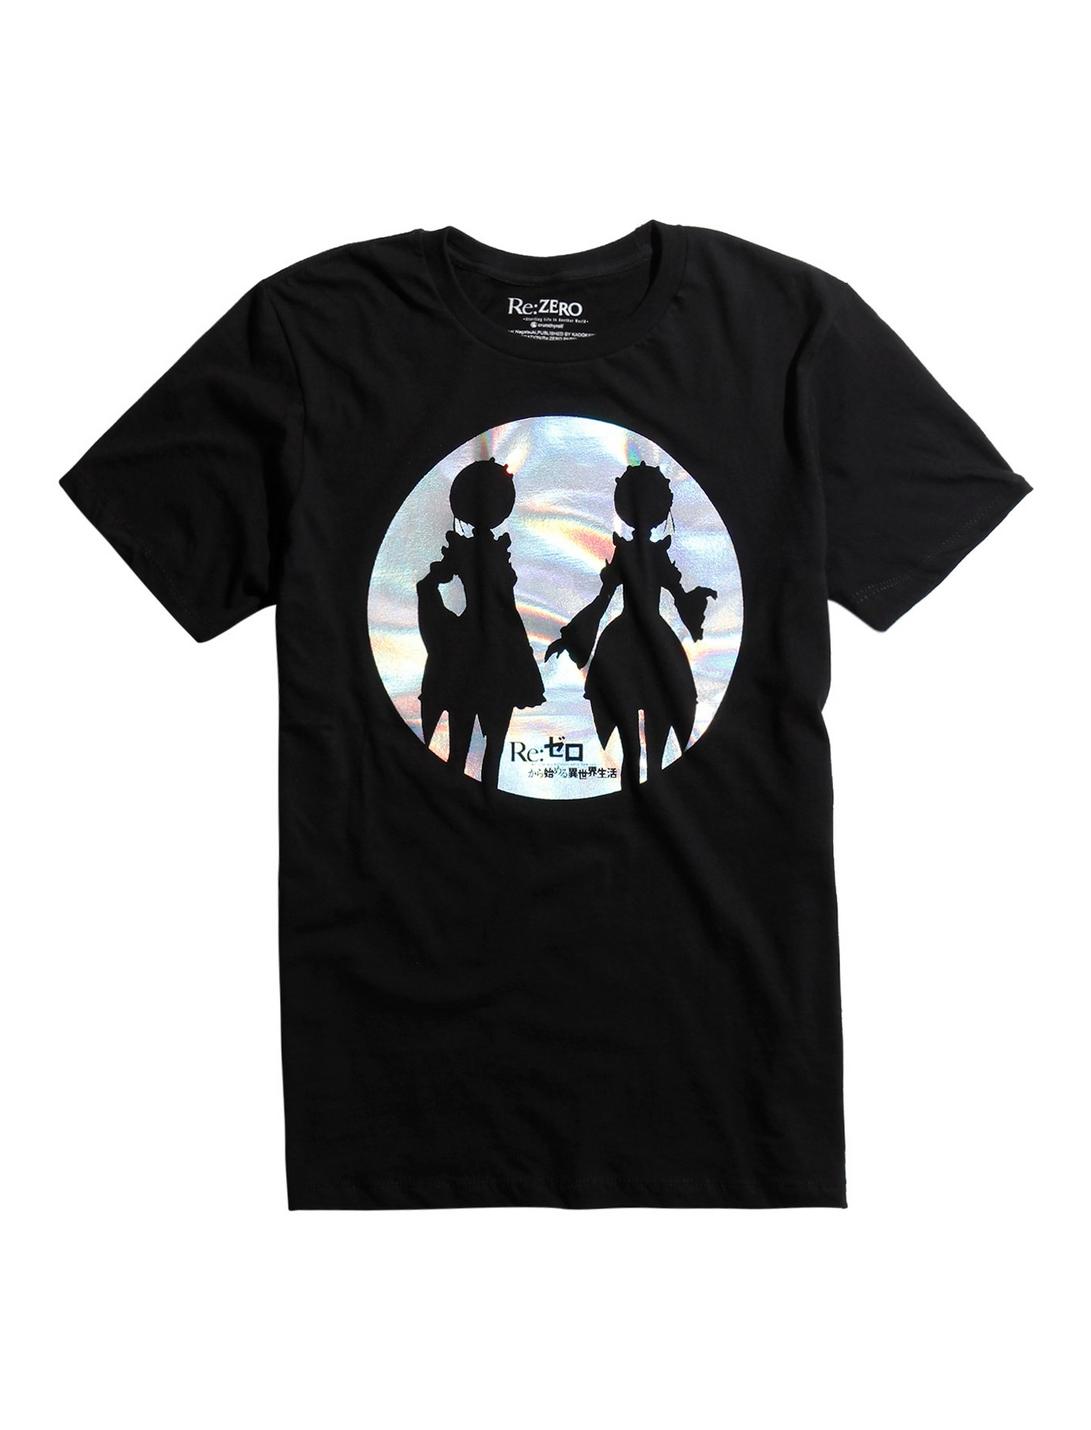 Re:ZERO Silhouette Shimmer Rem And Ram T-Shirt, BLACK, hi-res